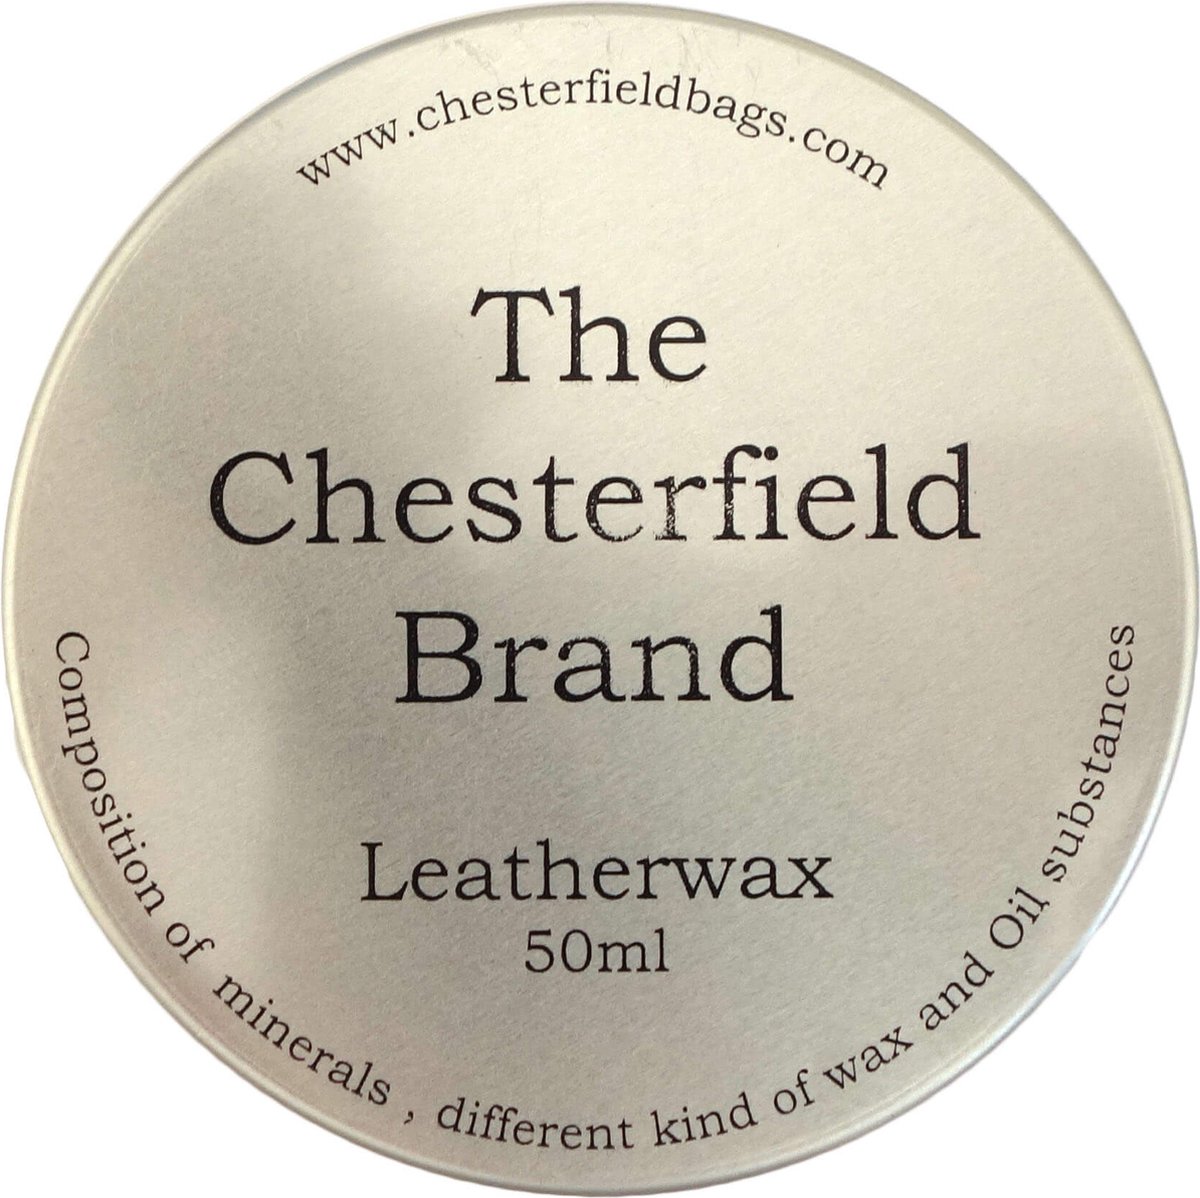 The Chesterfield Brand Leather Wax